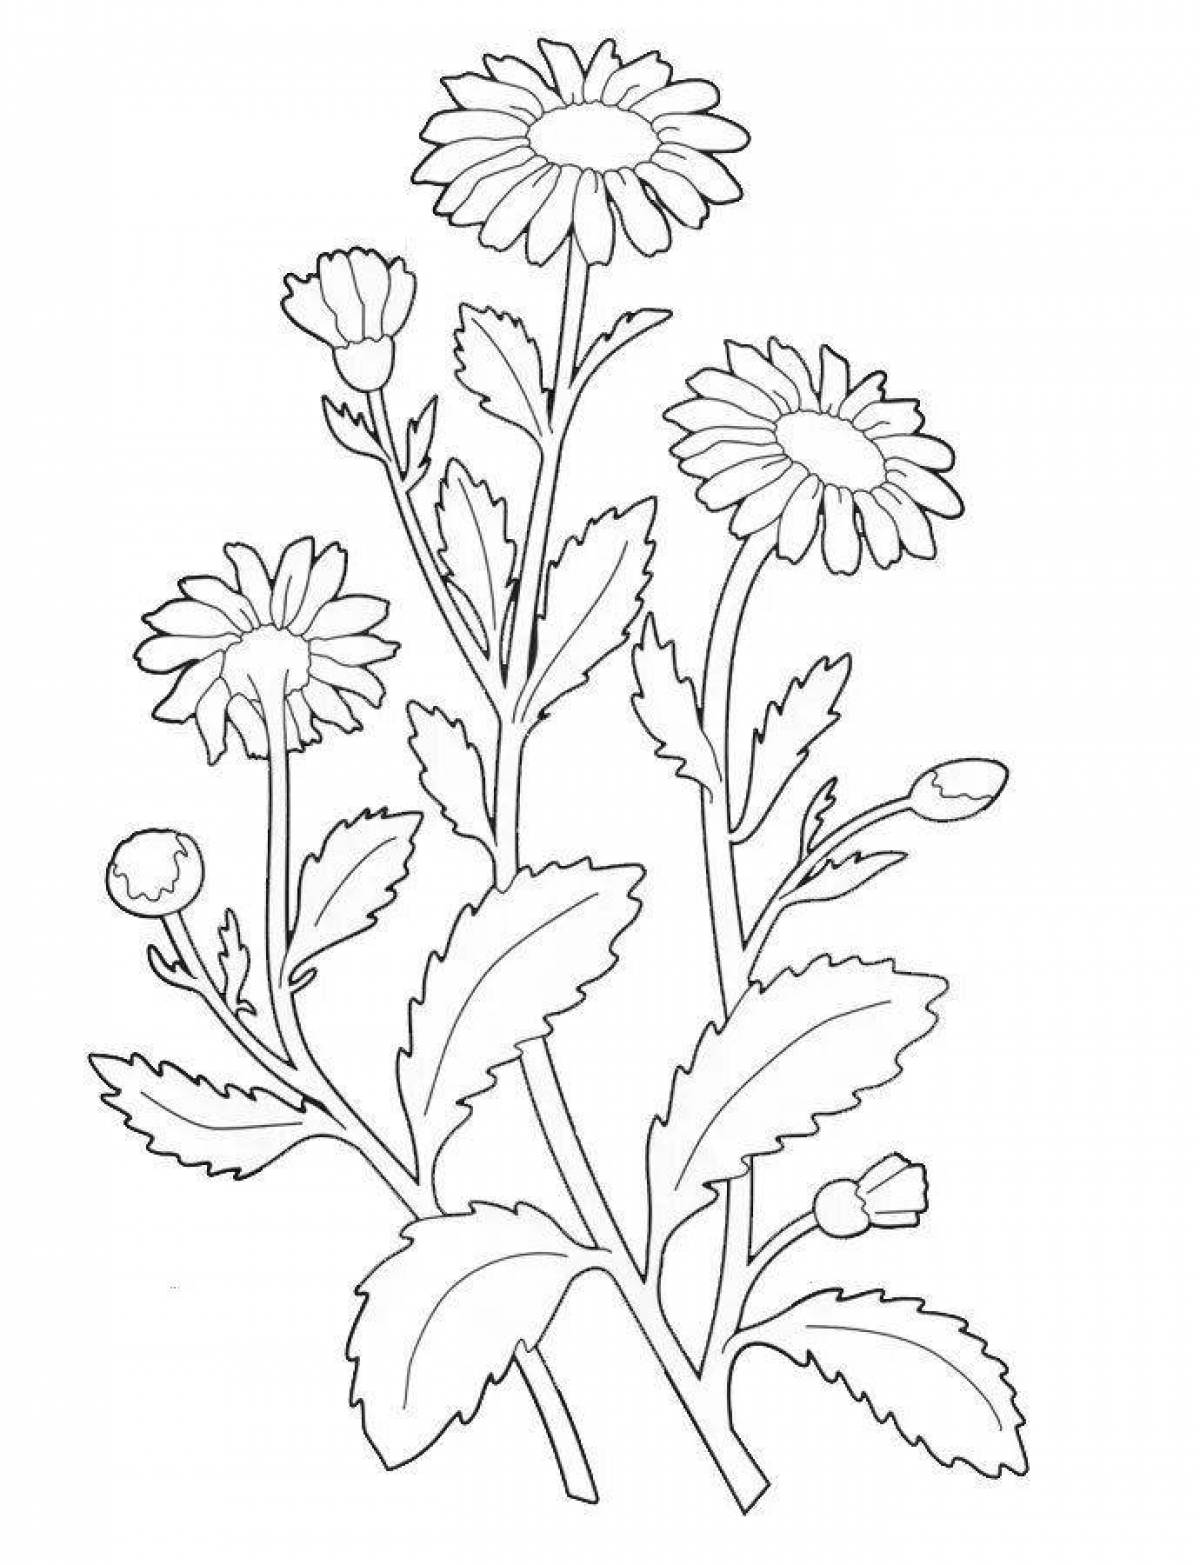 Adorable coloring book of medicinal plants with names